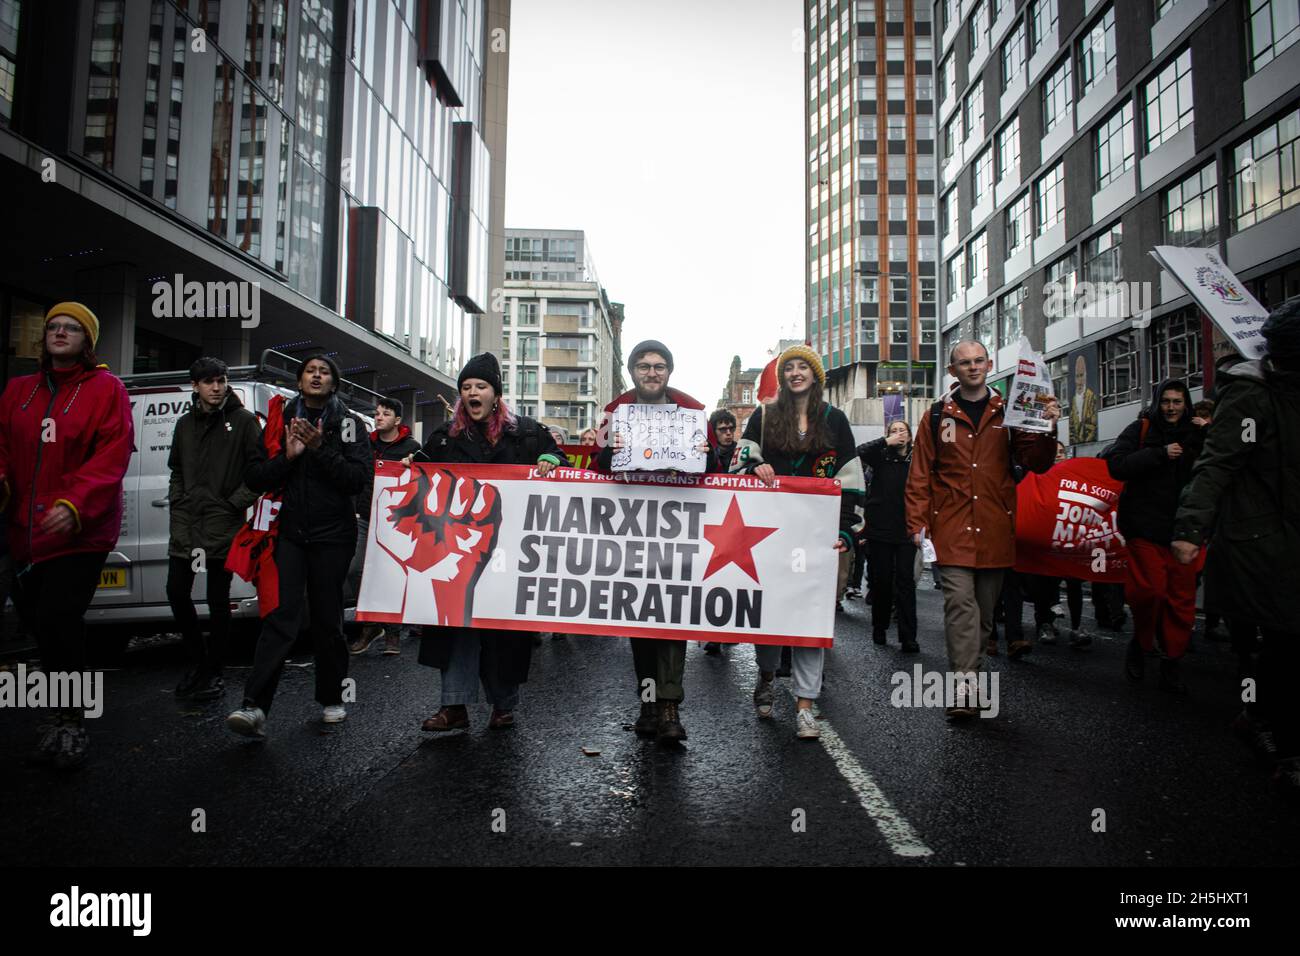 A group of activists from the Marxist Student Federation marching in the COP26 Glasgow Climate Marches Stock Photo